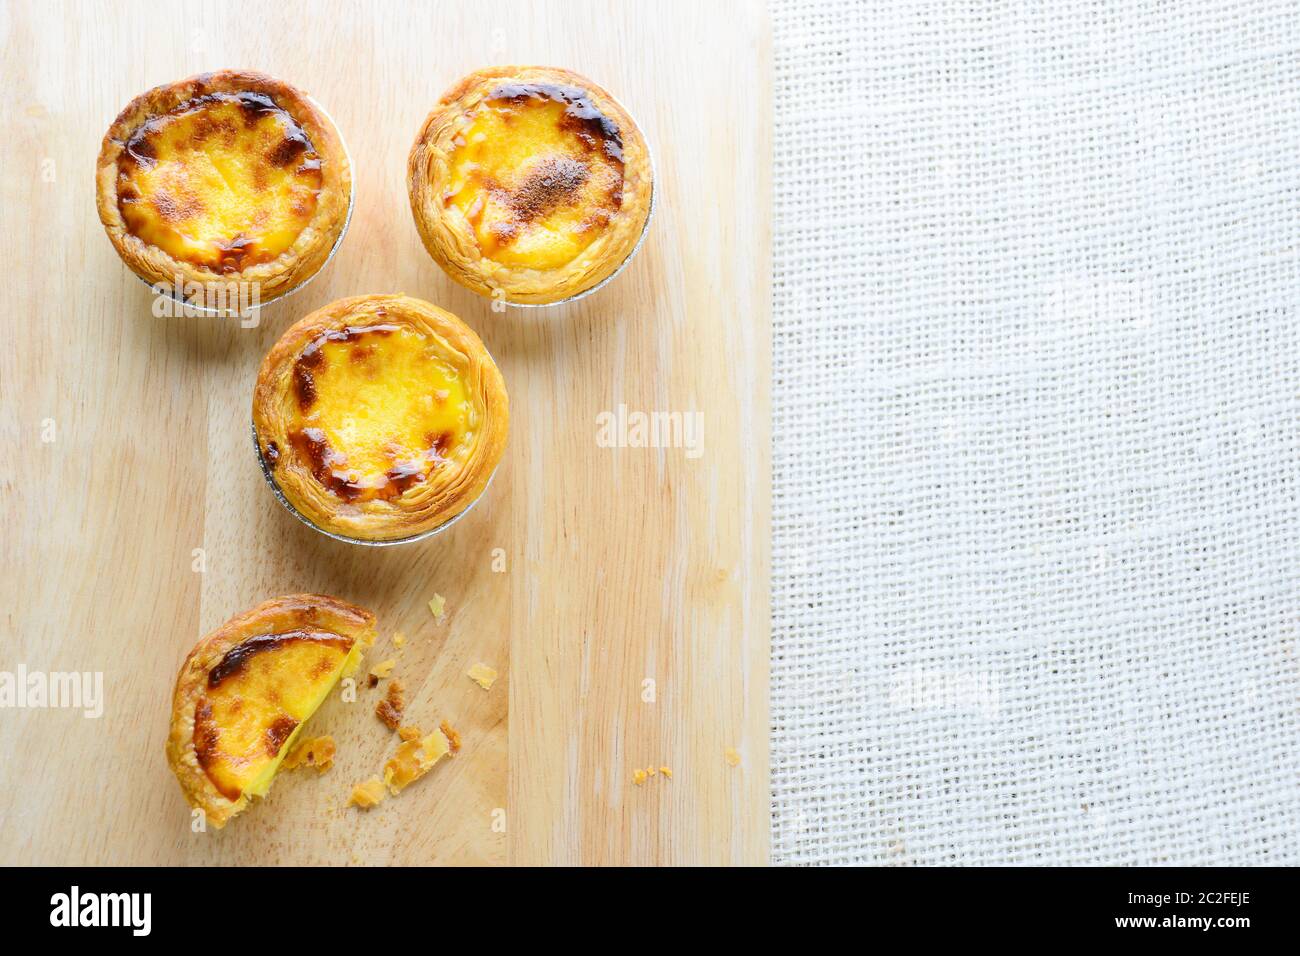 Portuguese Egg Tarts, is a kind of custard tart found in various Asian countries. The dish consists of an outer pastry crust and Stock Photo